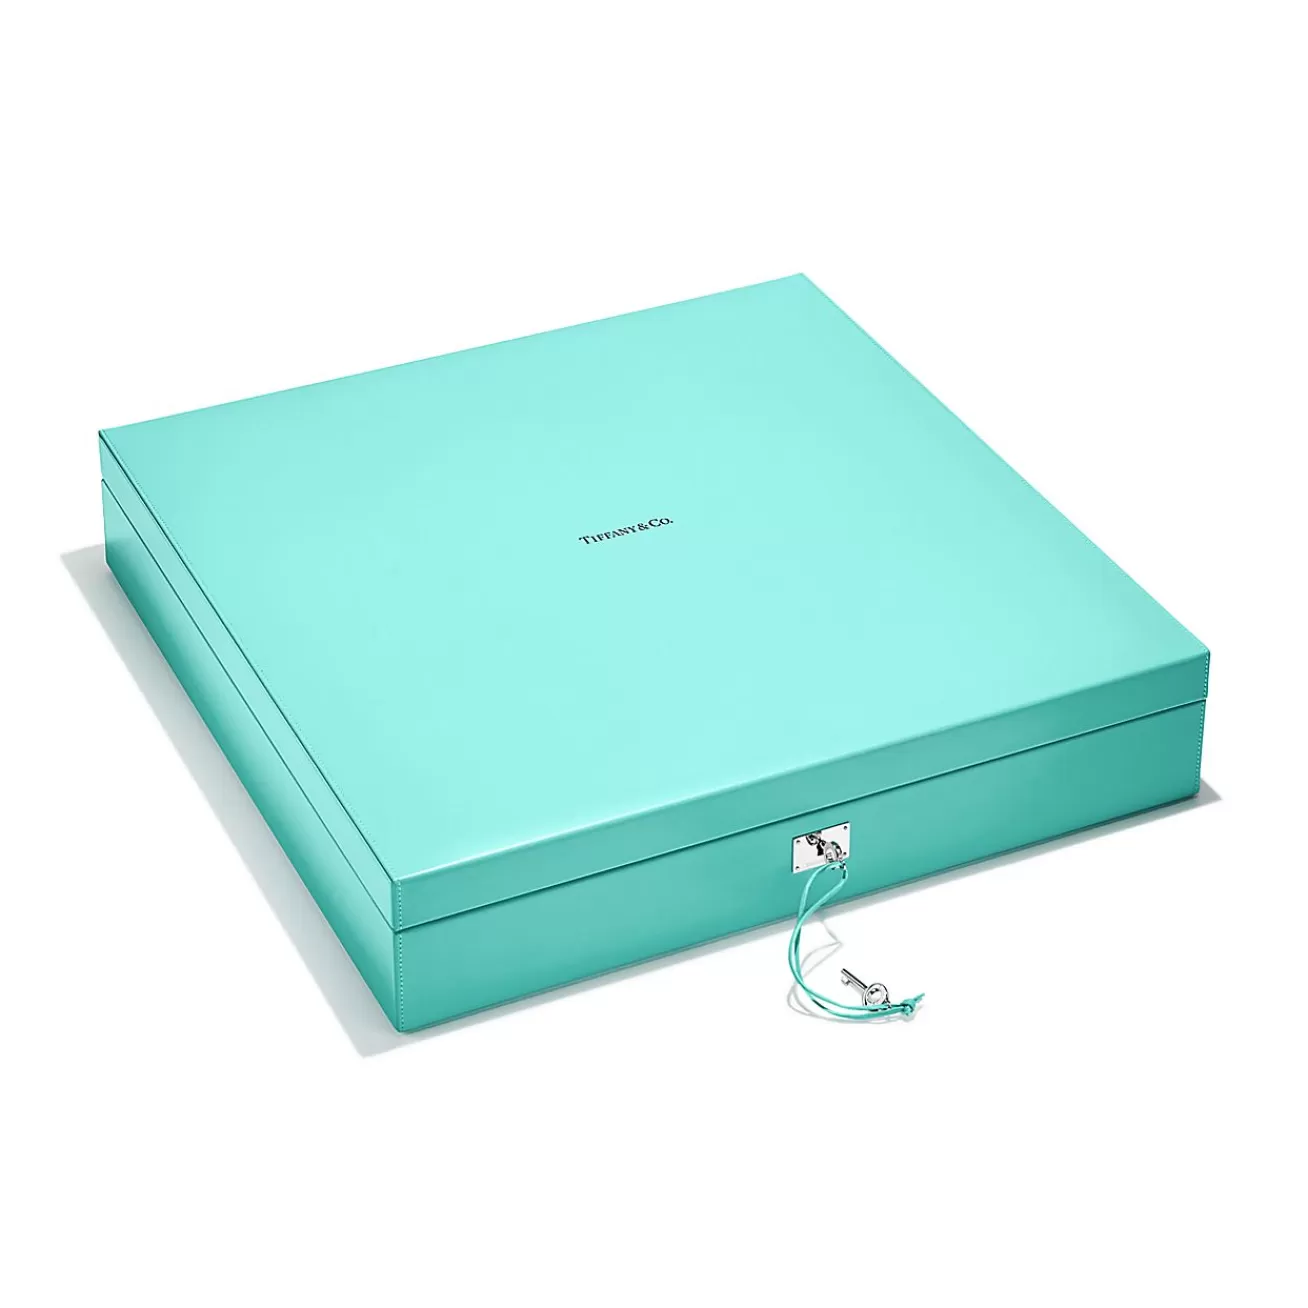 Tiffany & Co. Everyday Objects mahjong set in a Tiffany Blue® leather box. | ^ Business Gifts | Stationery, Games & Unique Objects